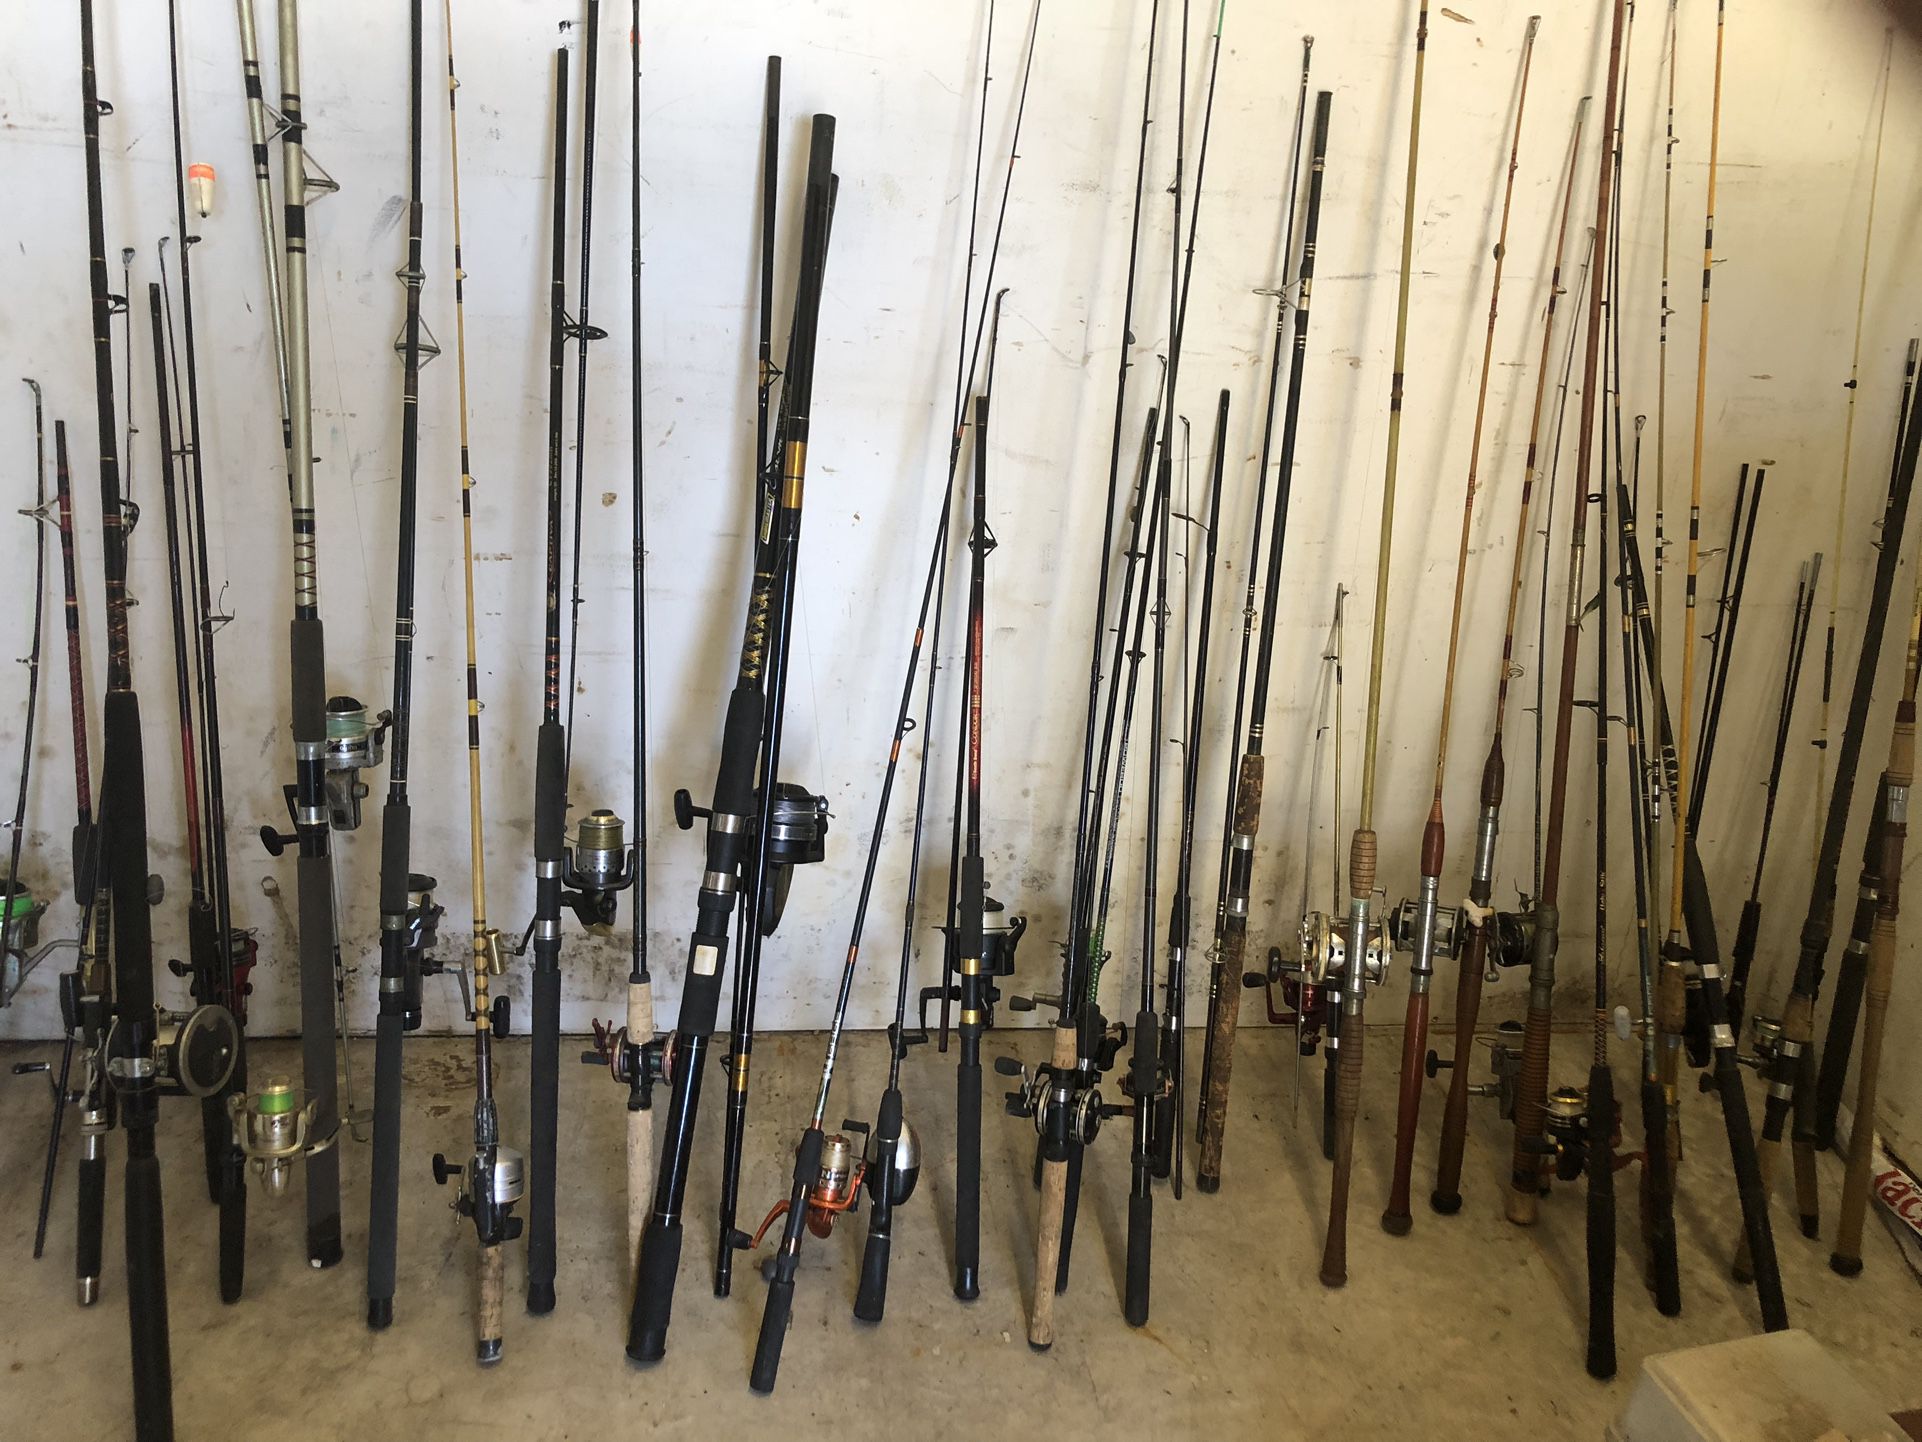 Misc. Fishing Gear-rods-reels -tackle Of All Sorts -Fishing Gaffs. And More